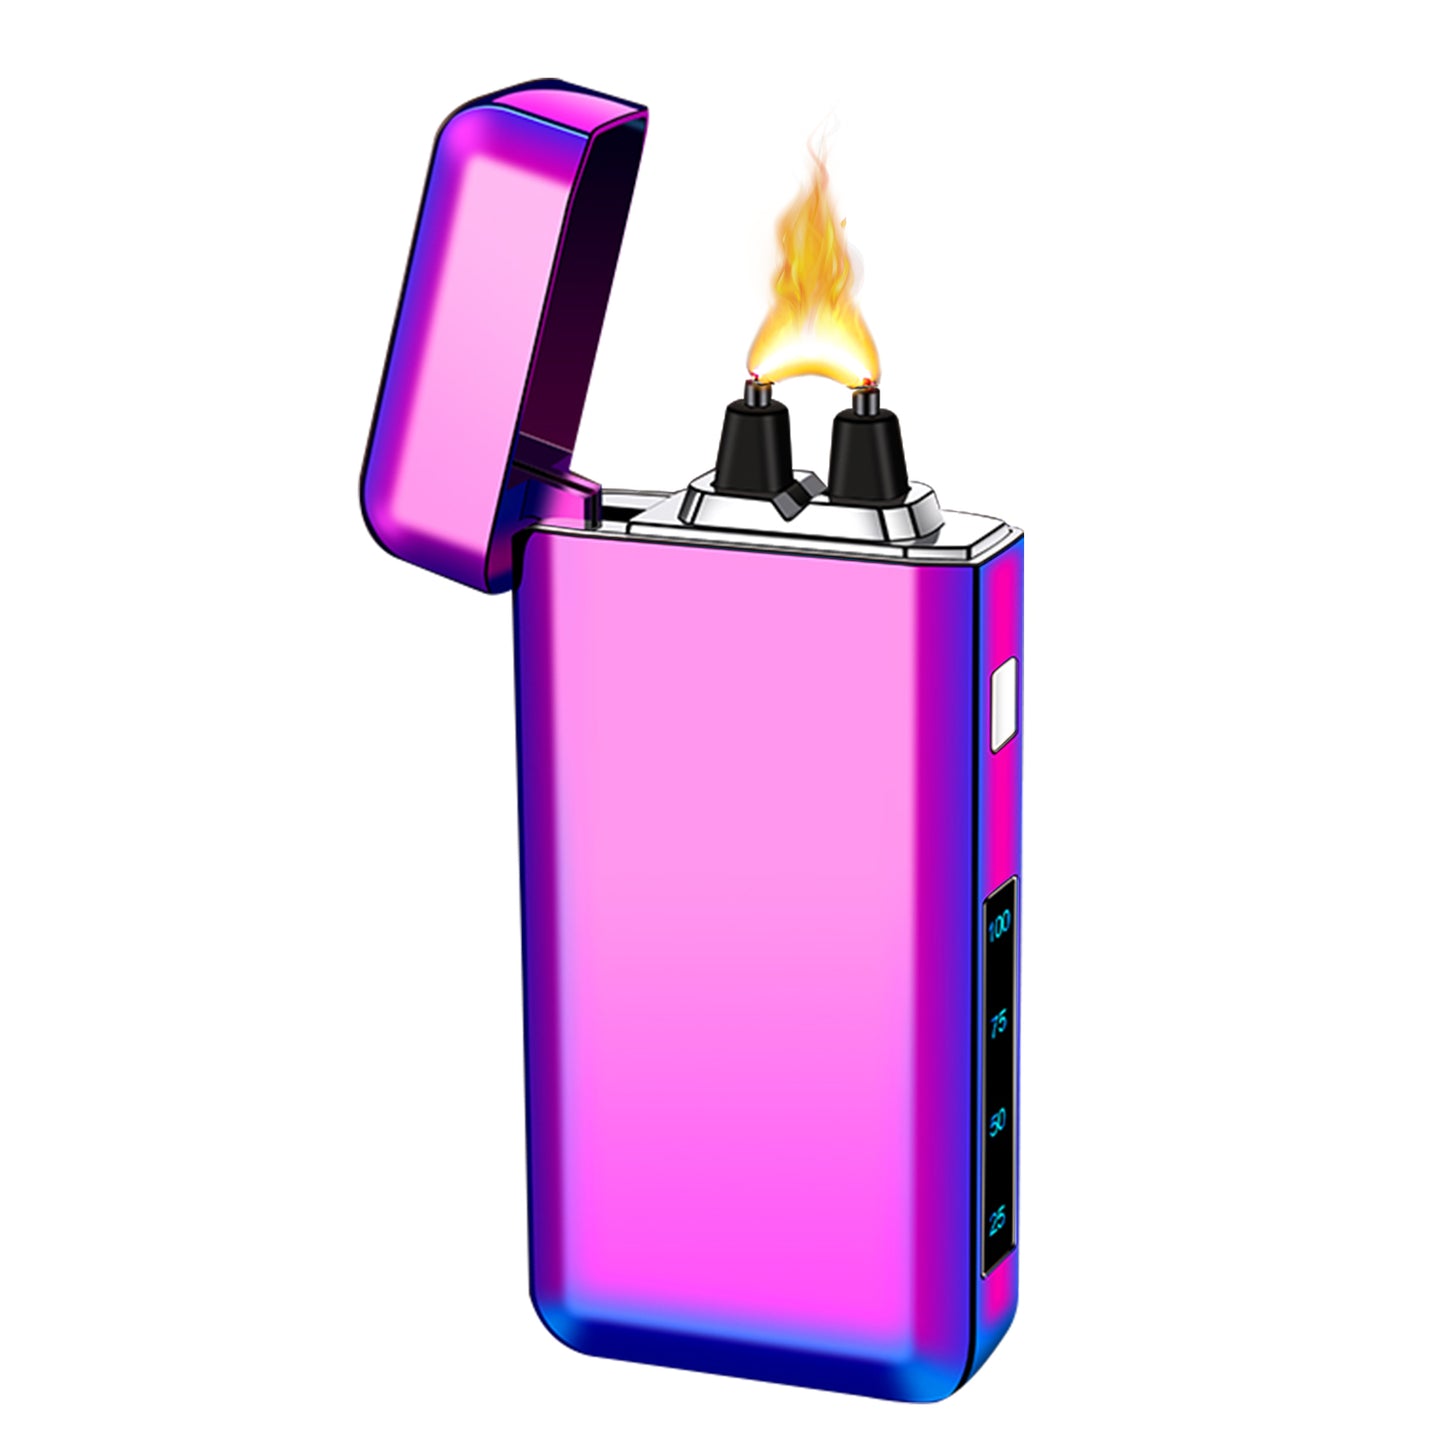 SKRFIRE Electric Lighter USB Type-C Rechargeable Plasma Arc Lighter, Windproof Torch Lighter High Power Flame Candle Lighter with LED Battery Indication for Camping, Hiking, Traveling